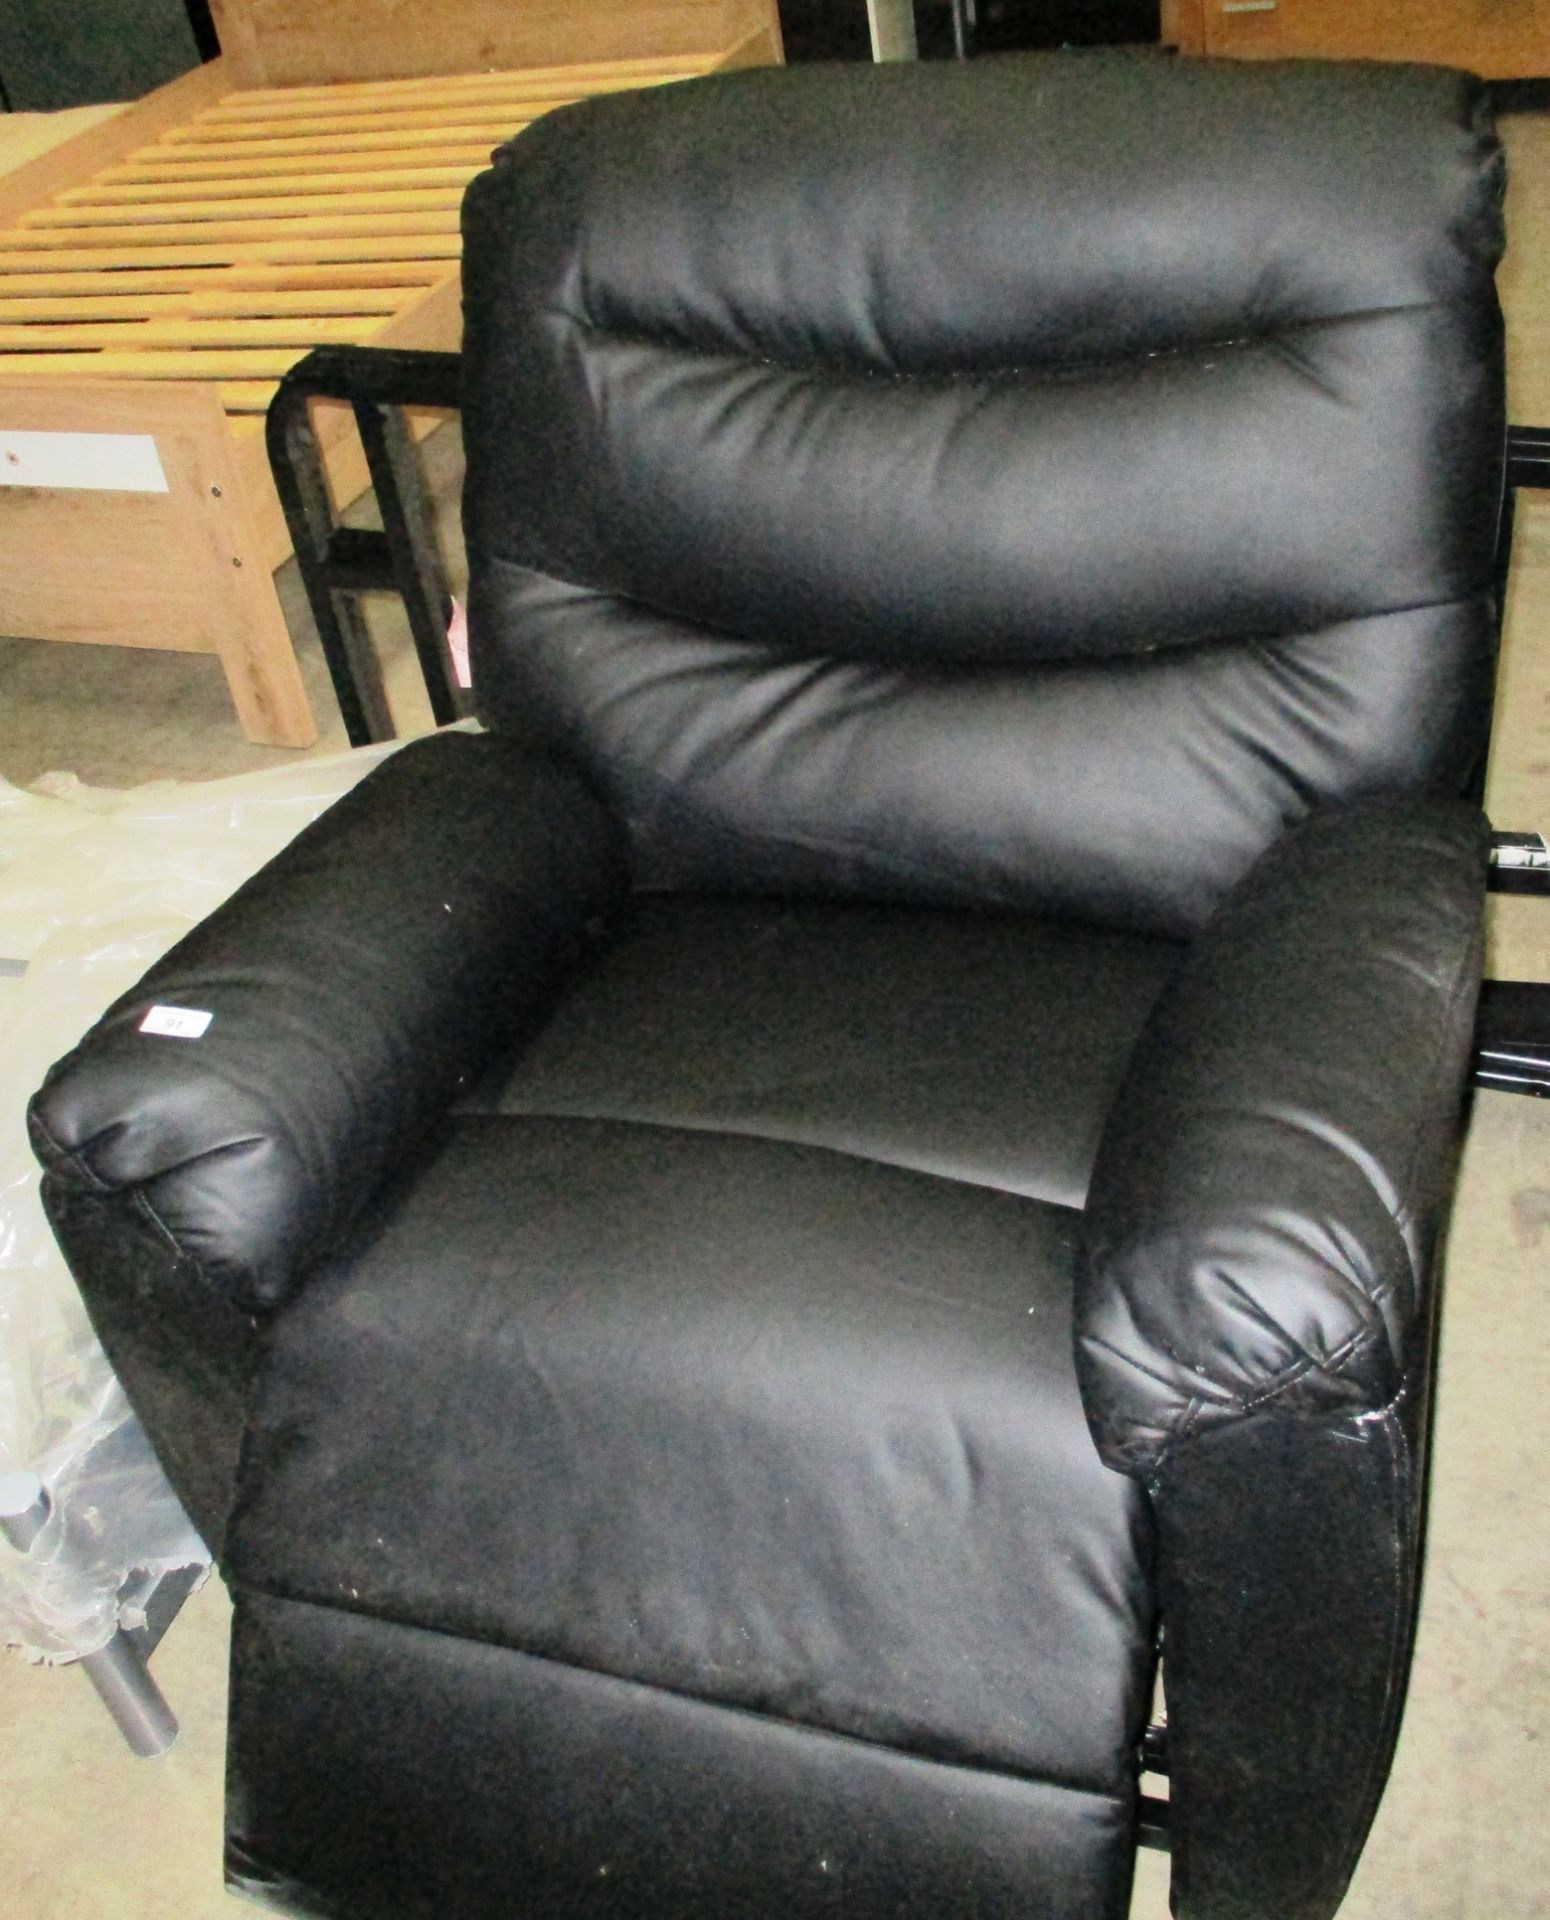 A black leatherette electric recliner chair complete with lead